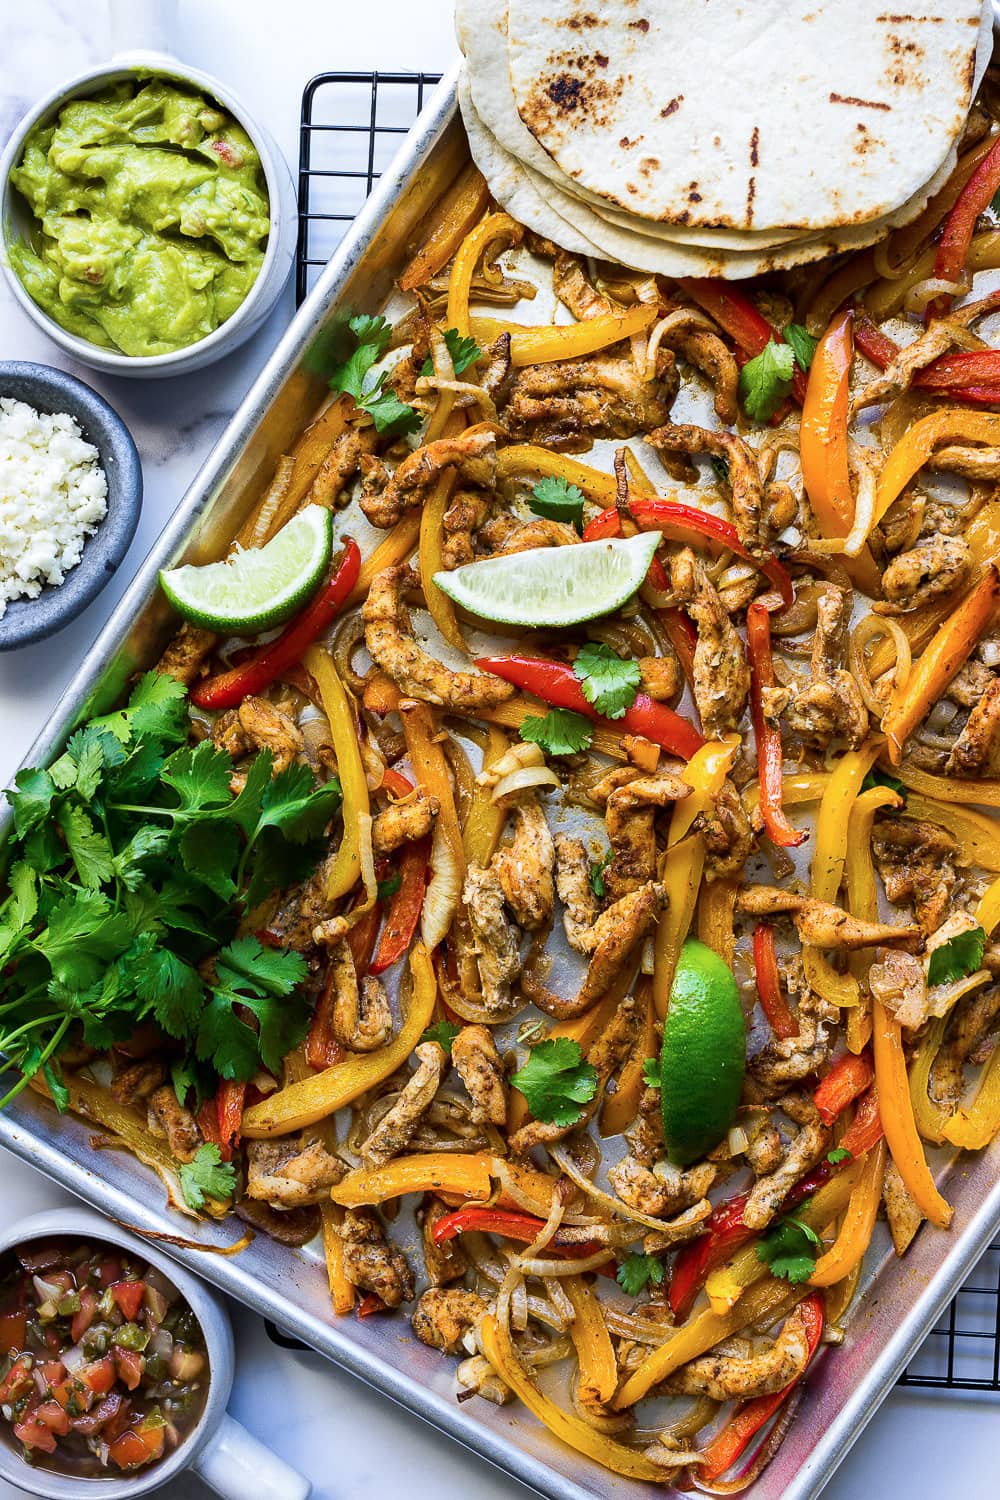 Some chicken fajitas with onions, bell peppers, cilantro and lime wedges on a sheet pan.